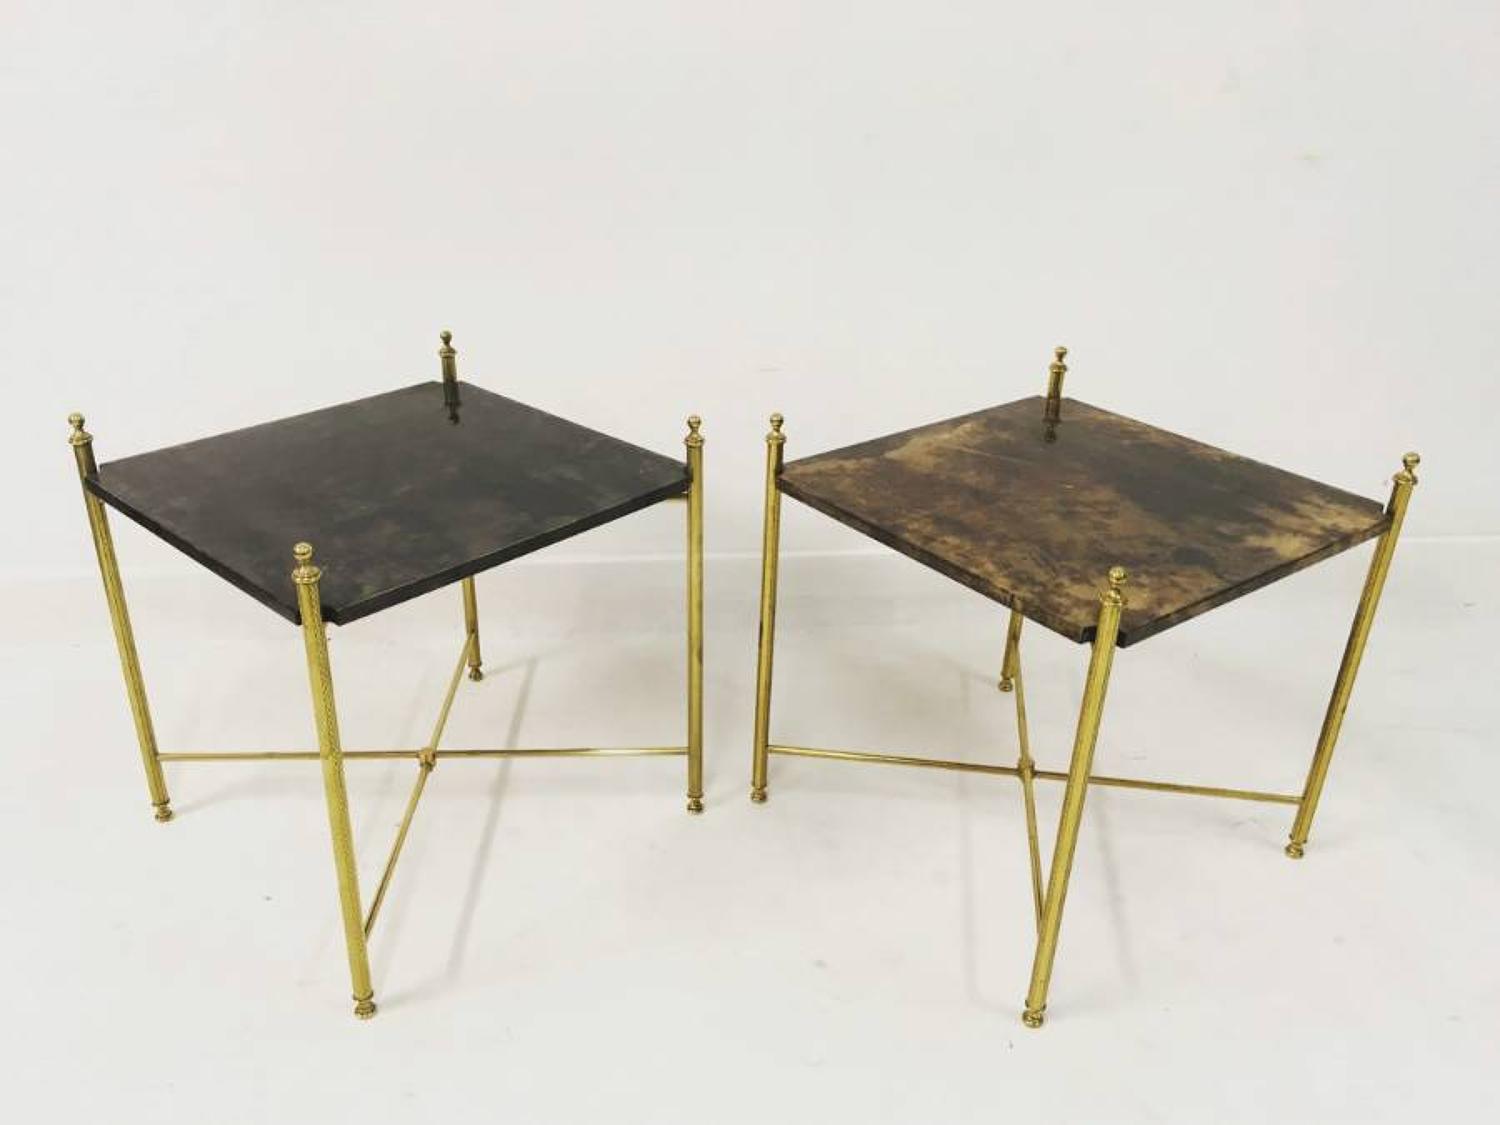 A pair of lacquered goatskin tables by Aldo Tura